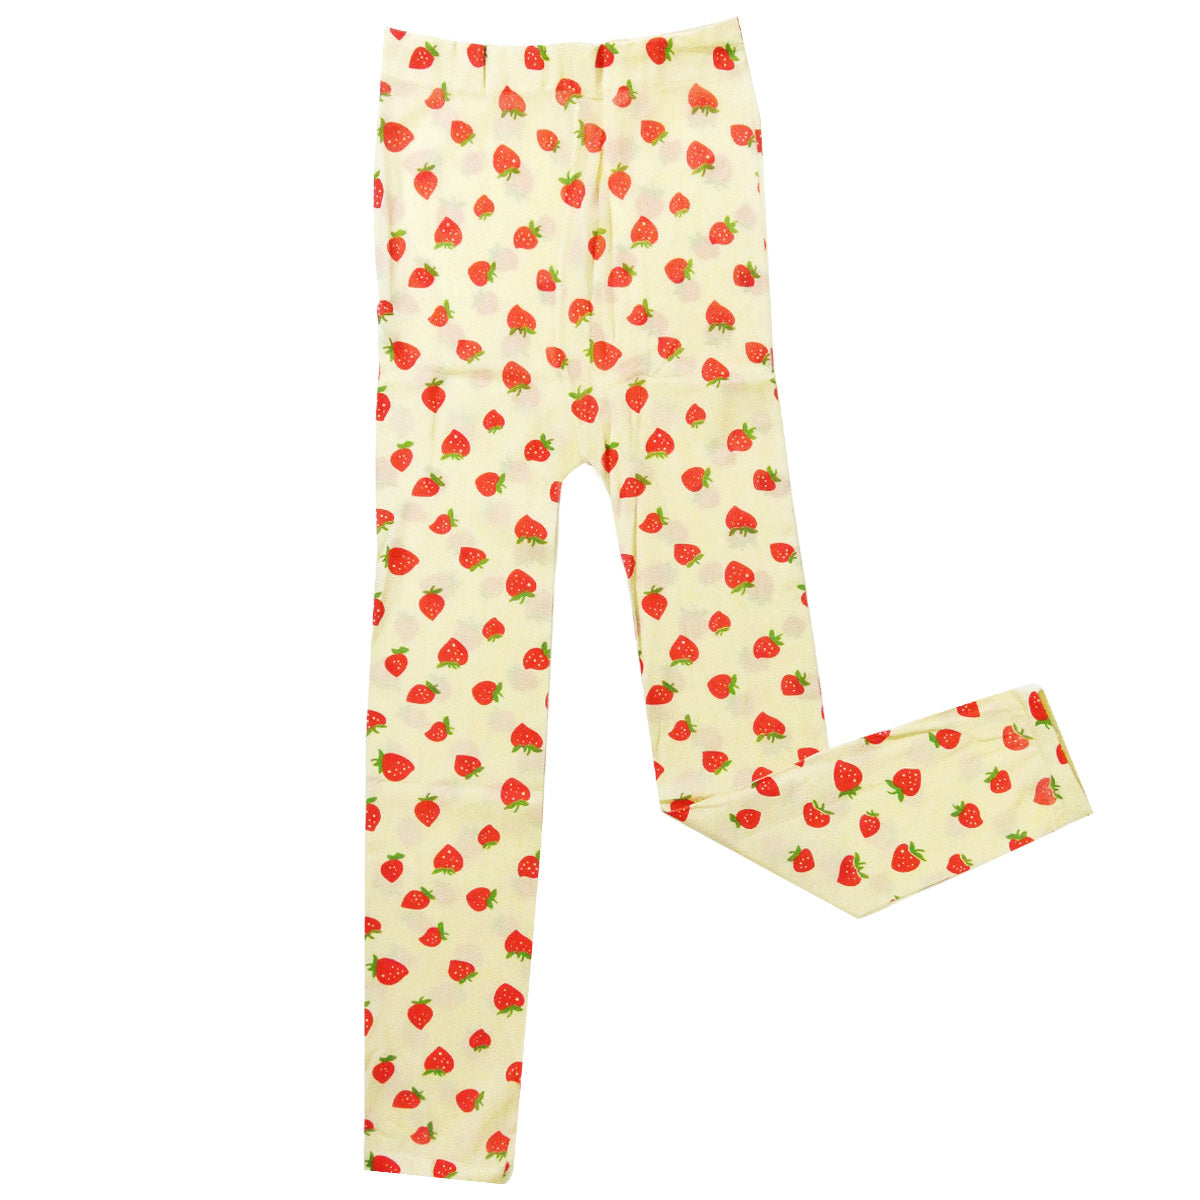 Wrapables Colorful Footless Tights Leggings